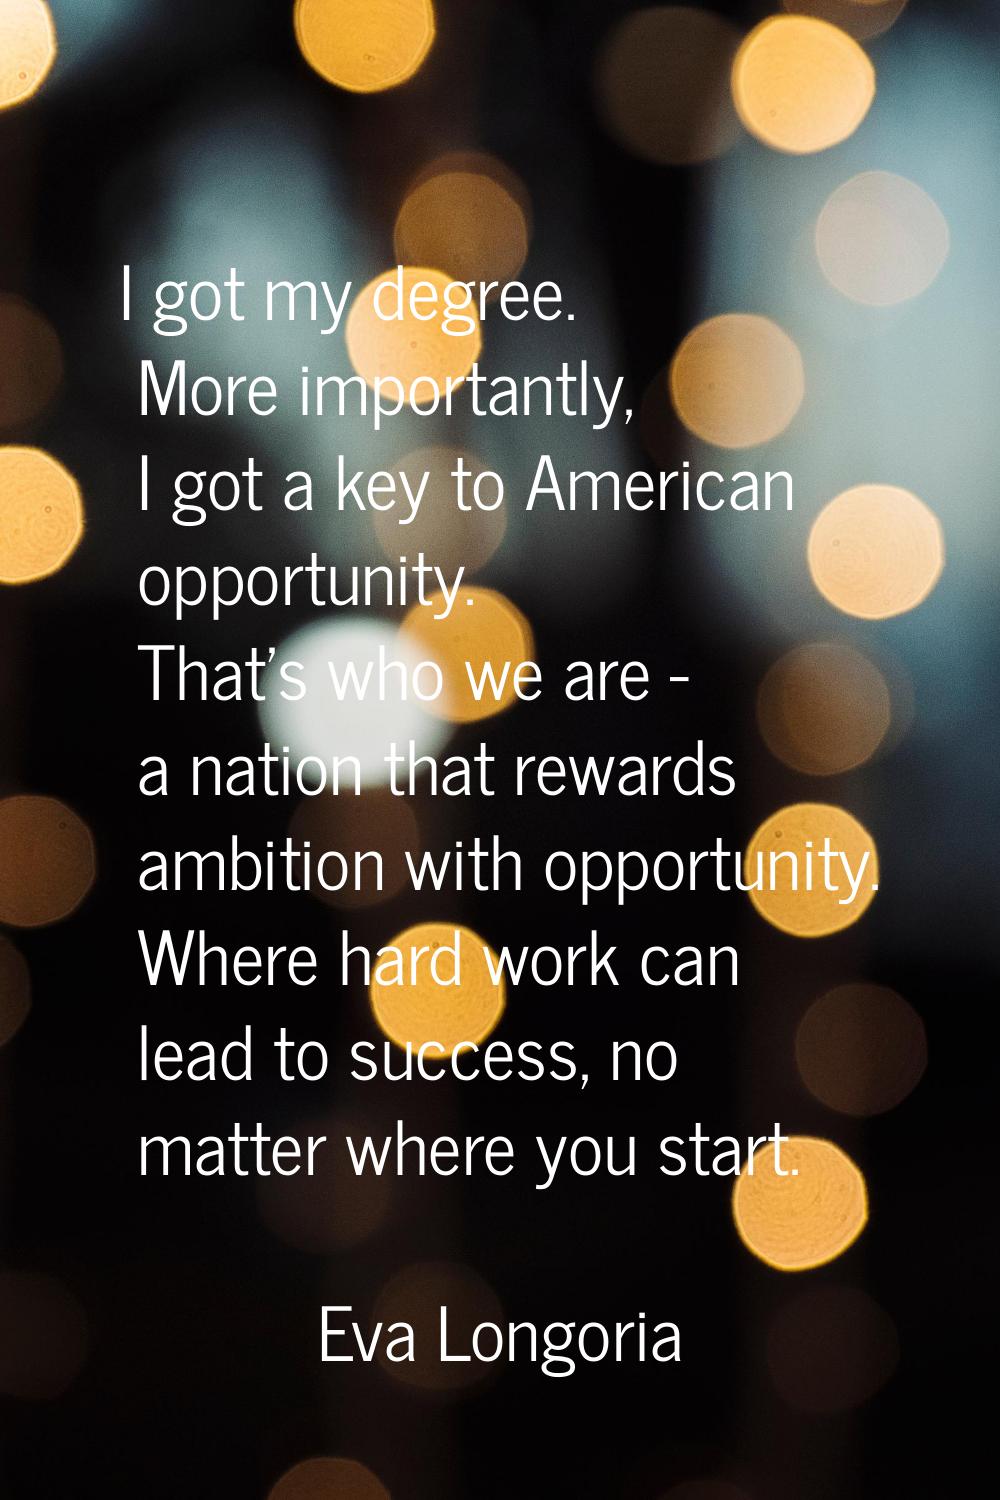 I got my degree. More importantly, I got a key to American opportunity. That's who we are - a natio